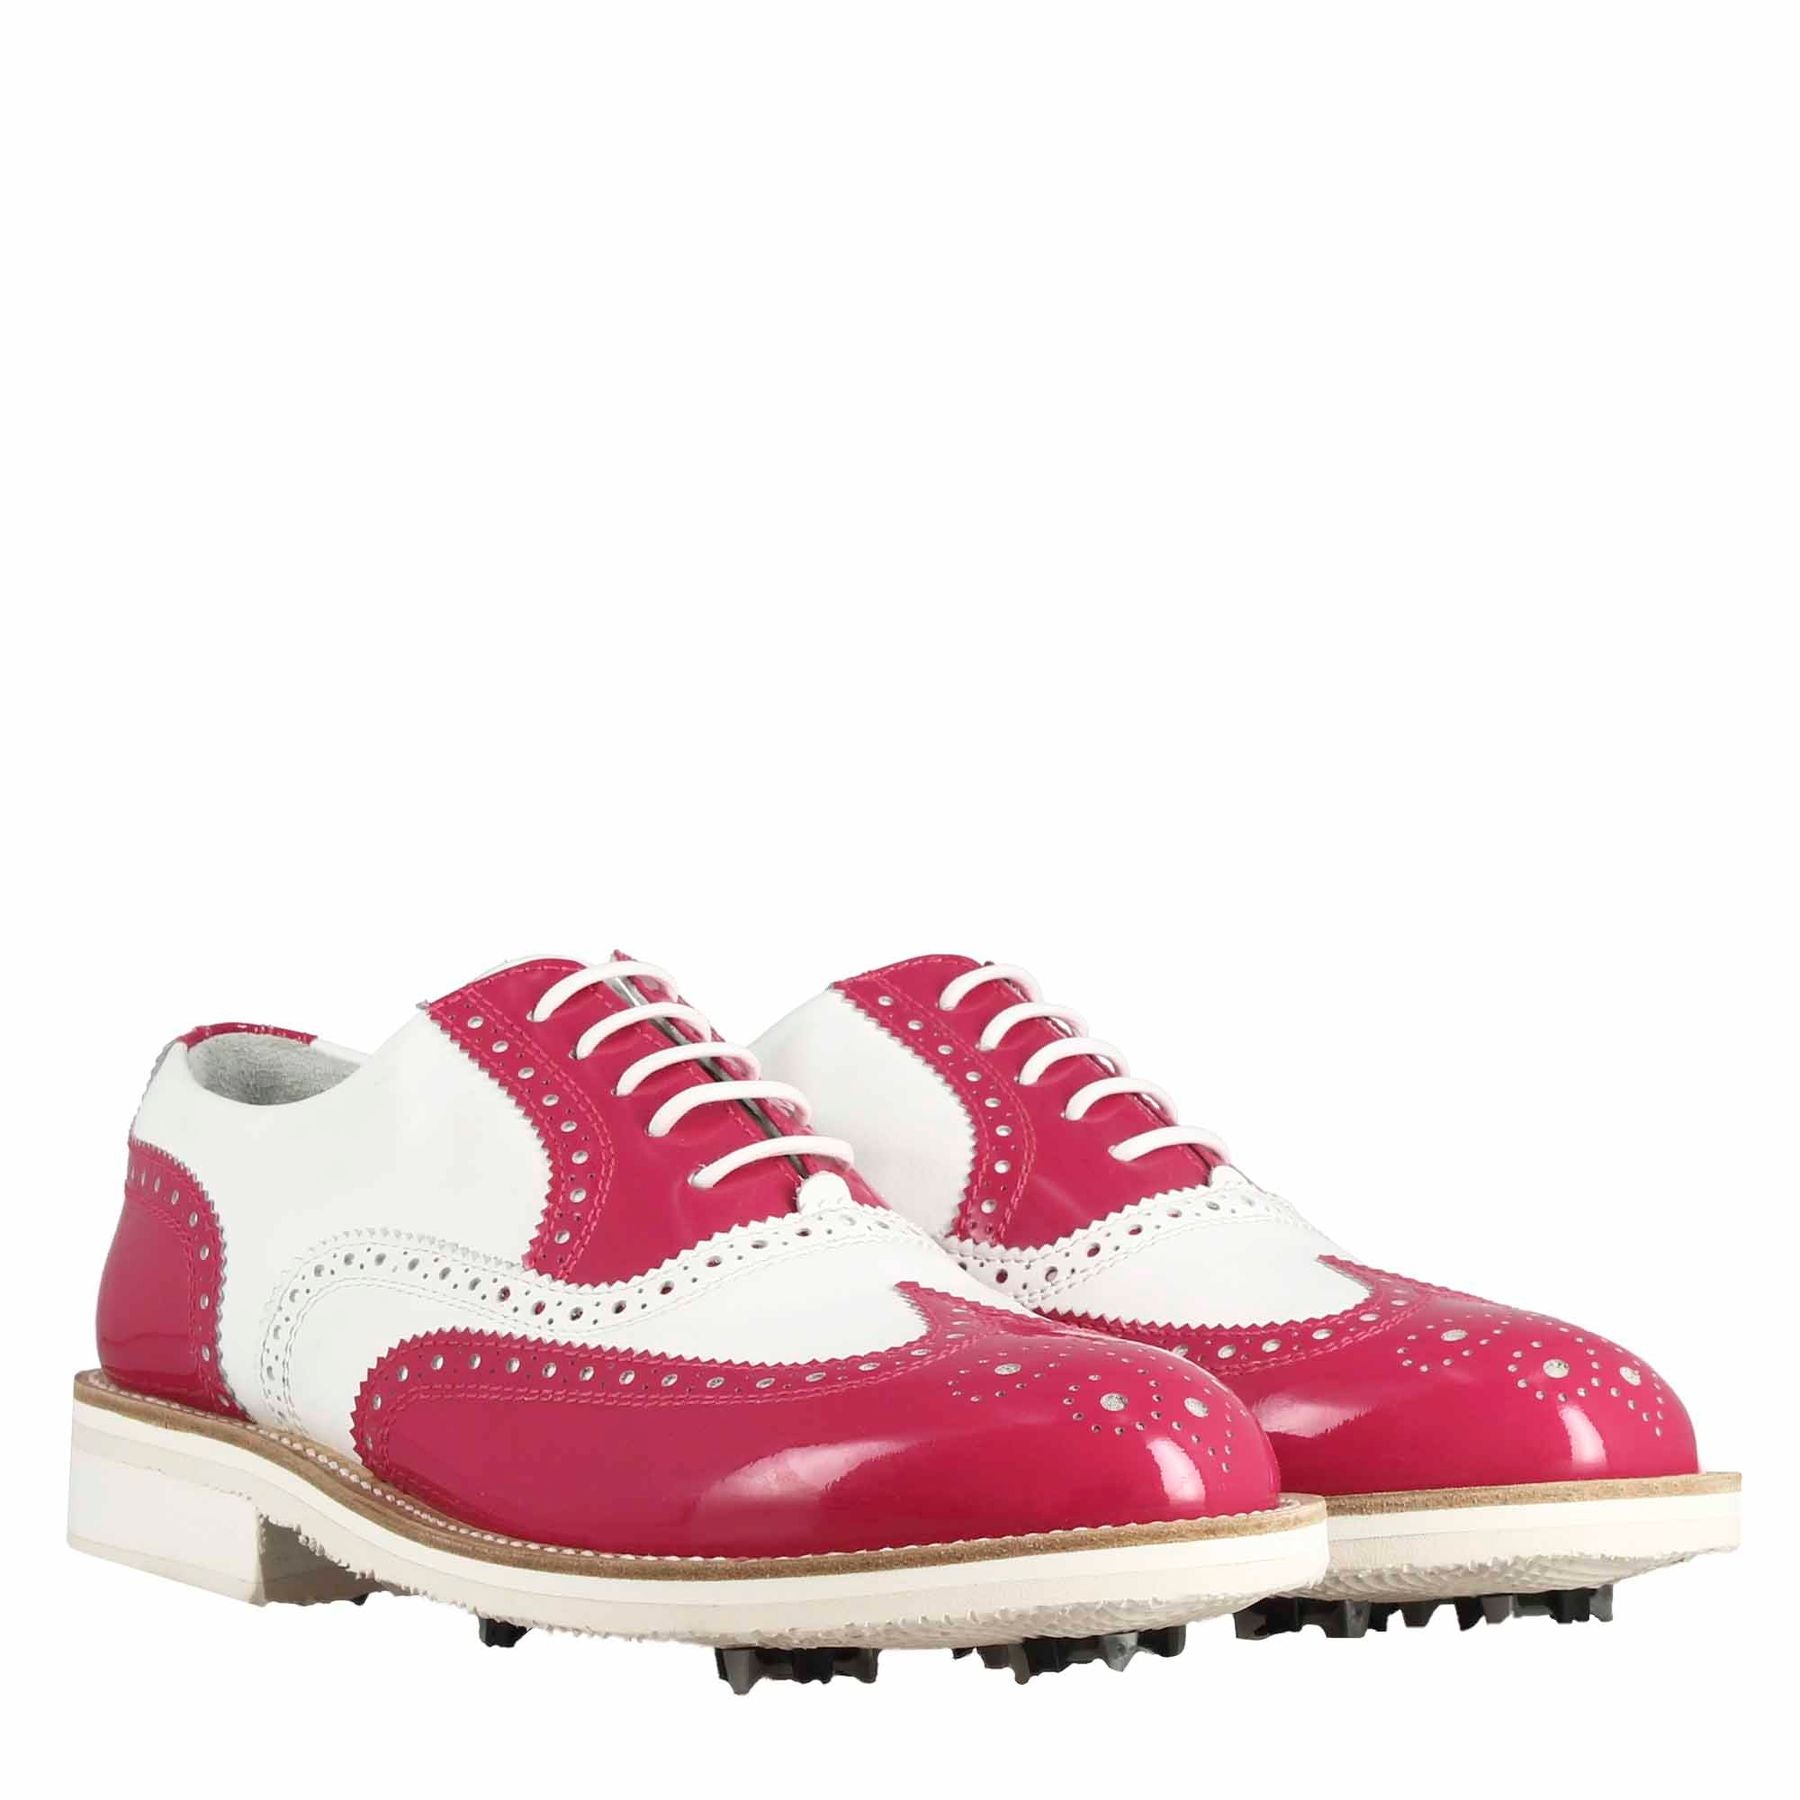 Handmade women's golf shoes in shiny white pink leather